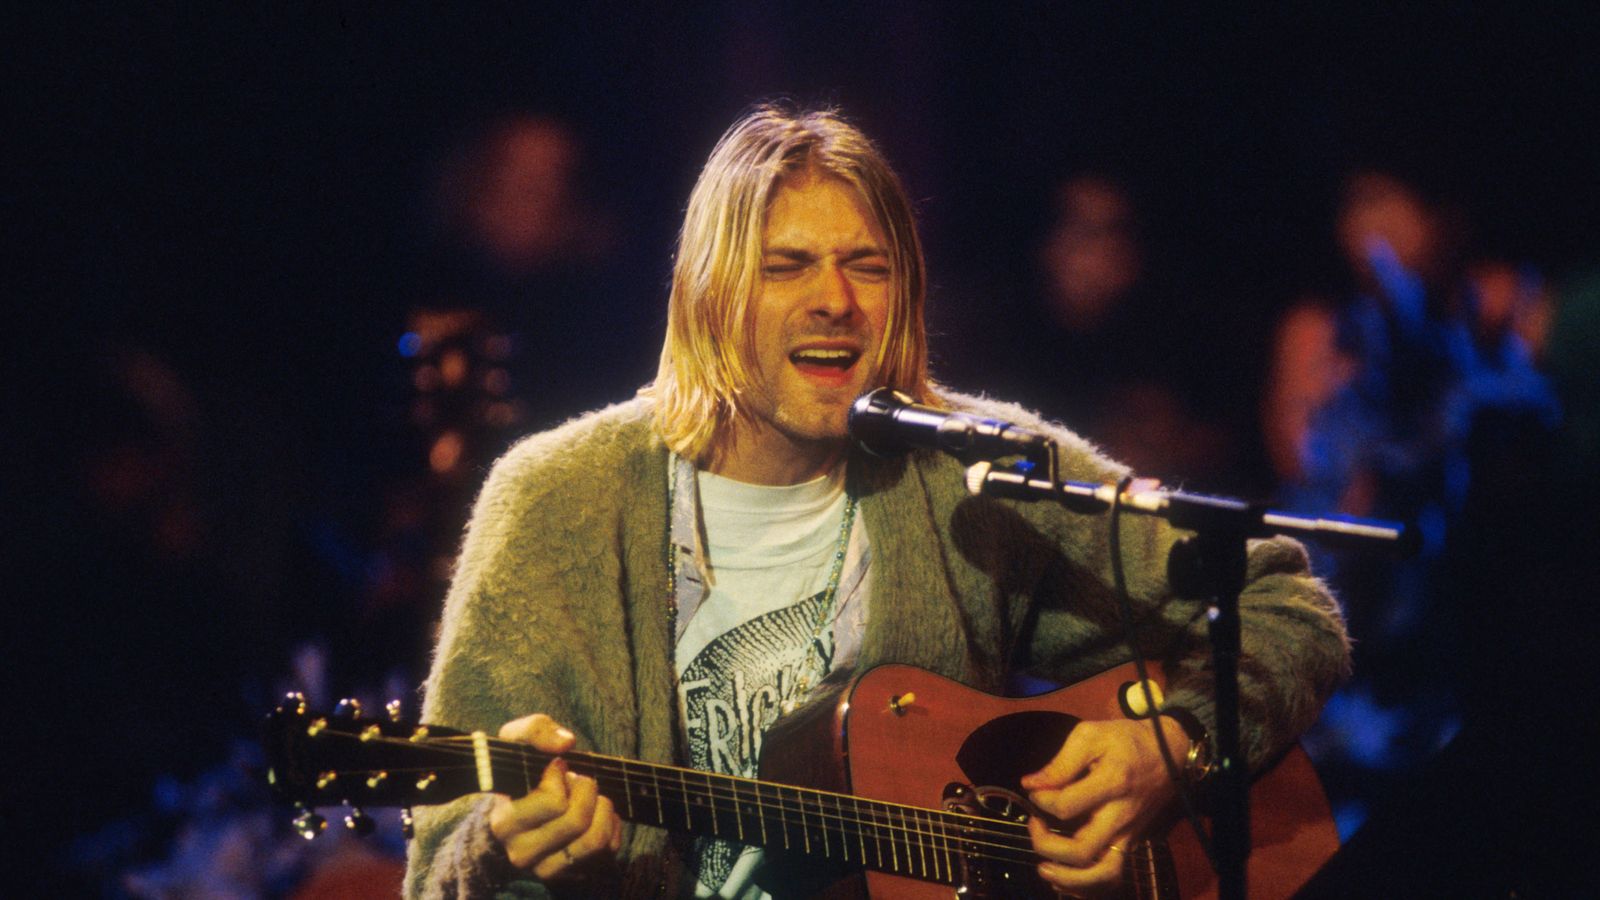 Hair from Kurt Cobain, John Lennon and Jimi Hendrix  expected to raise thousands at auction